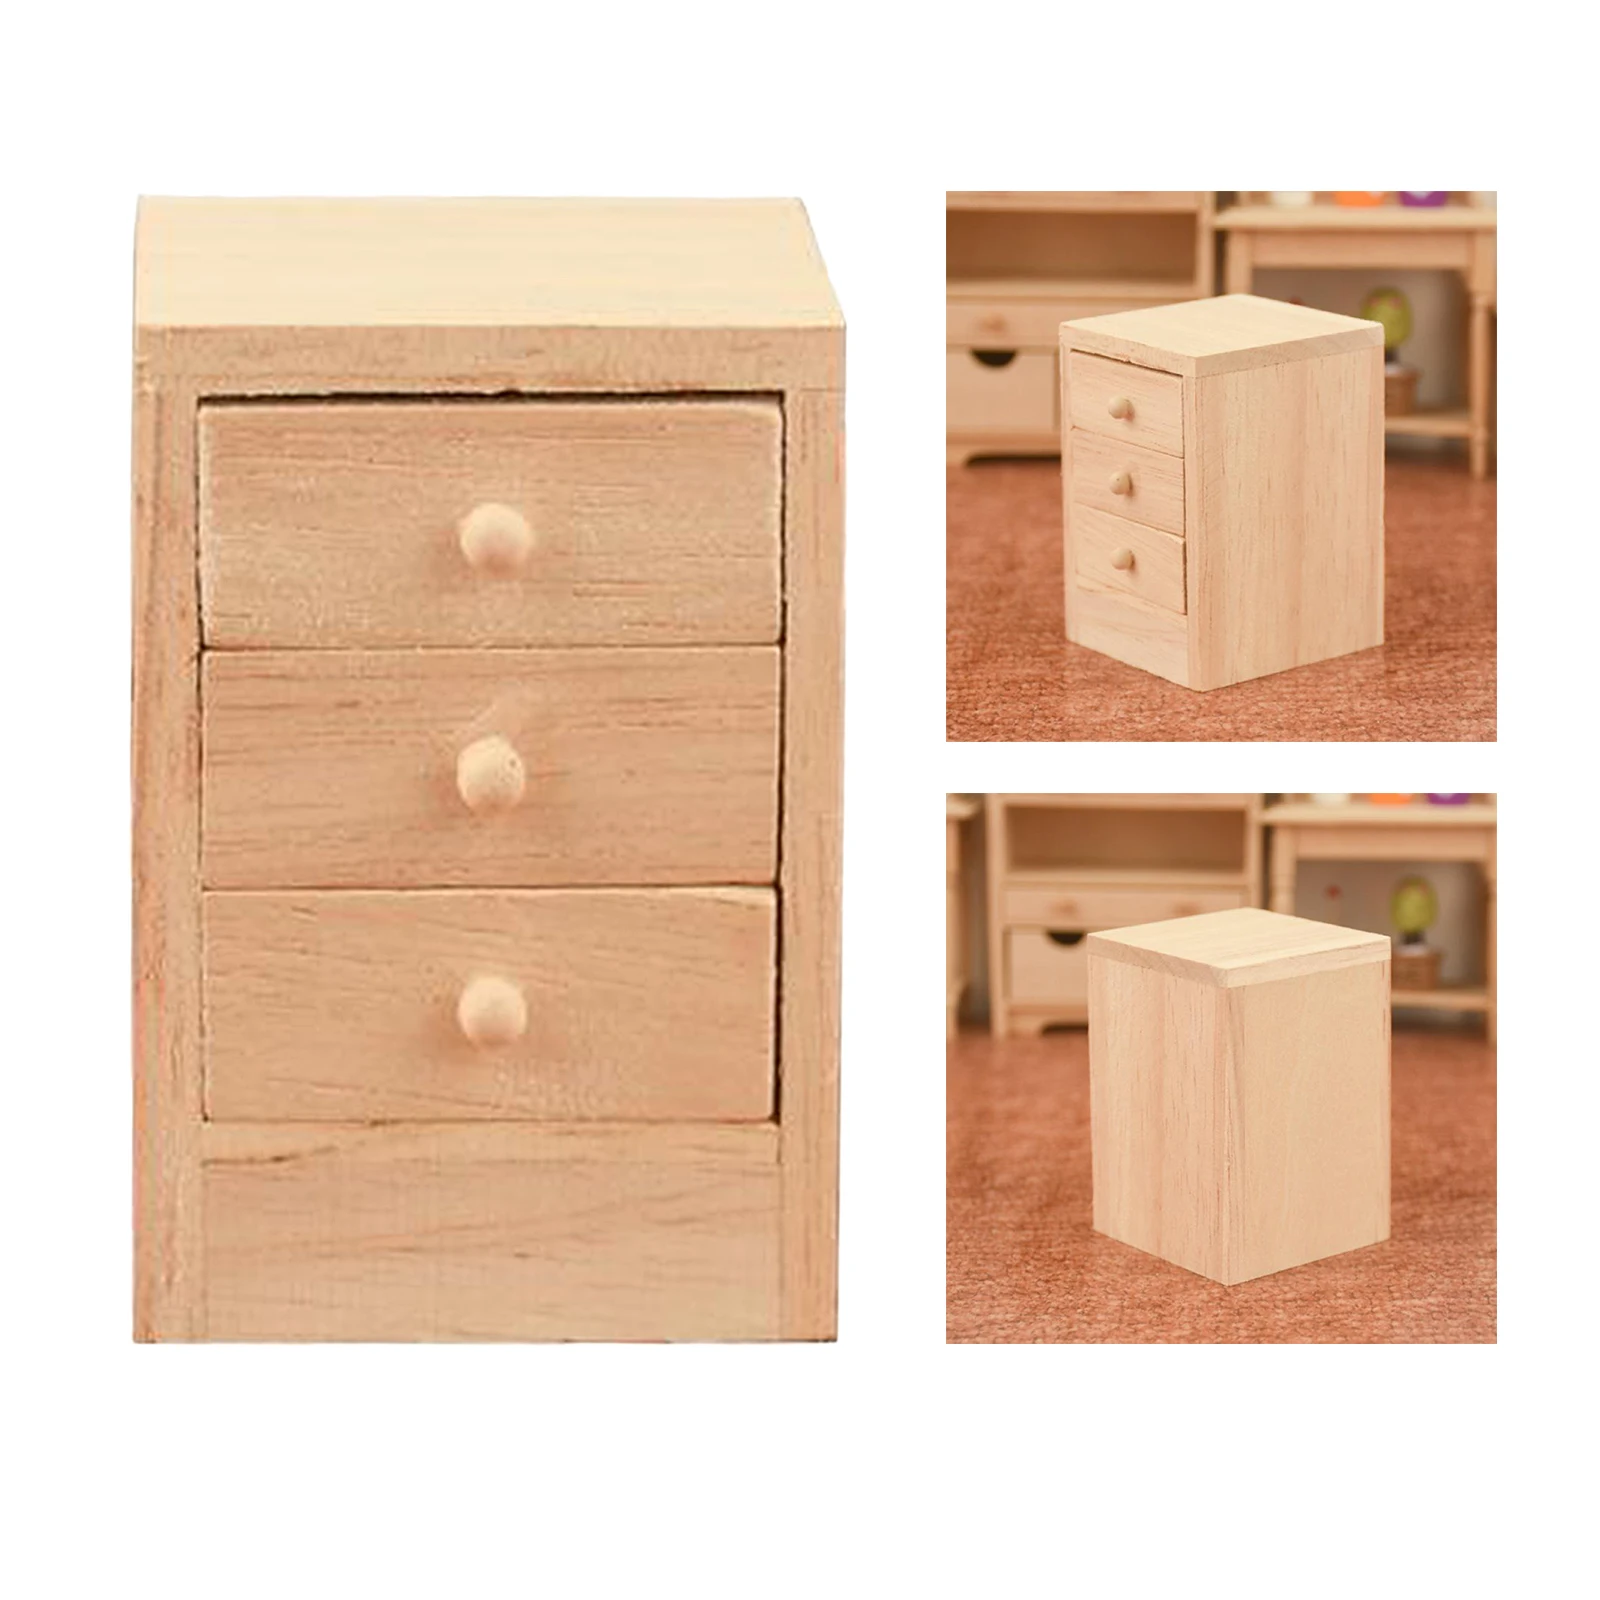 1:12 Scale Doll House Miniature Wood Bedside Cupboard,Simulation Model Baby Doll Bedroom Furniture Supplies,Scenery Ornaments